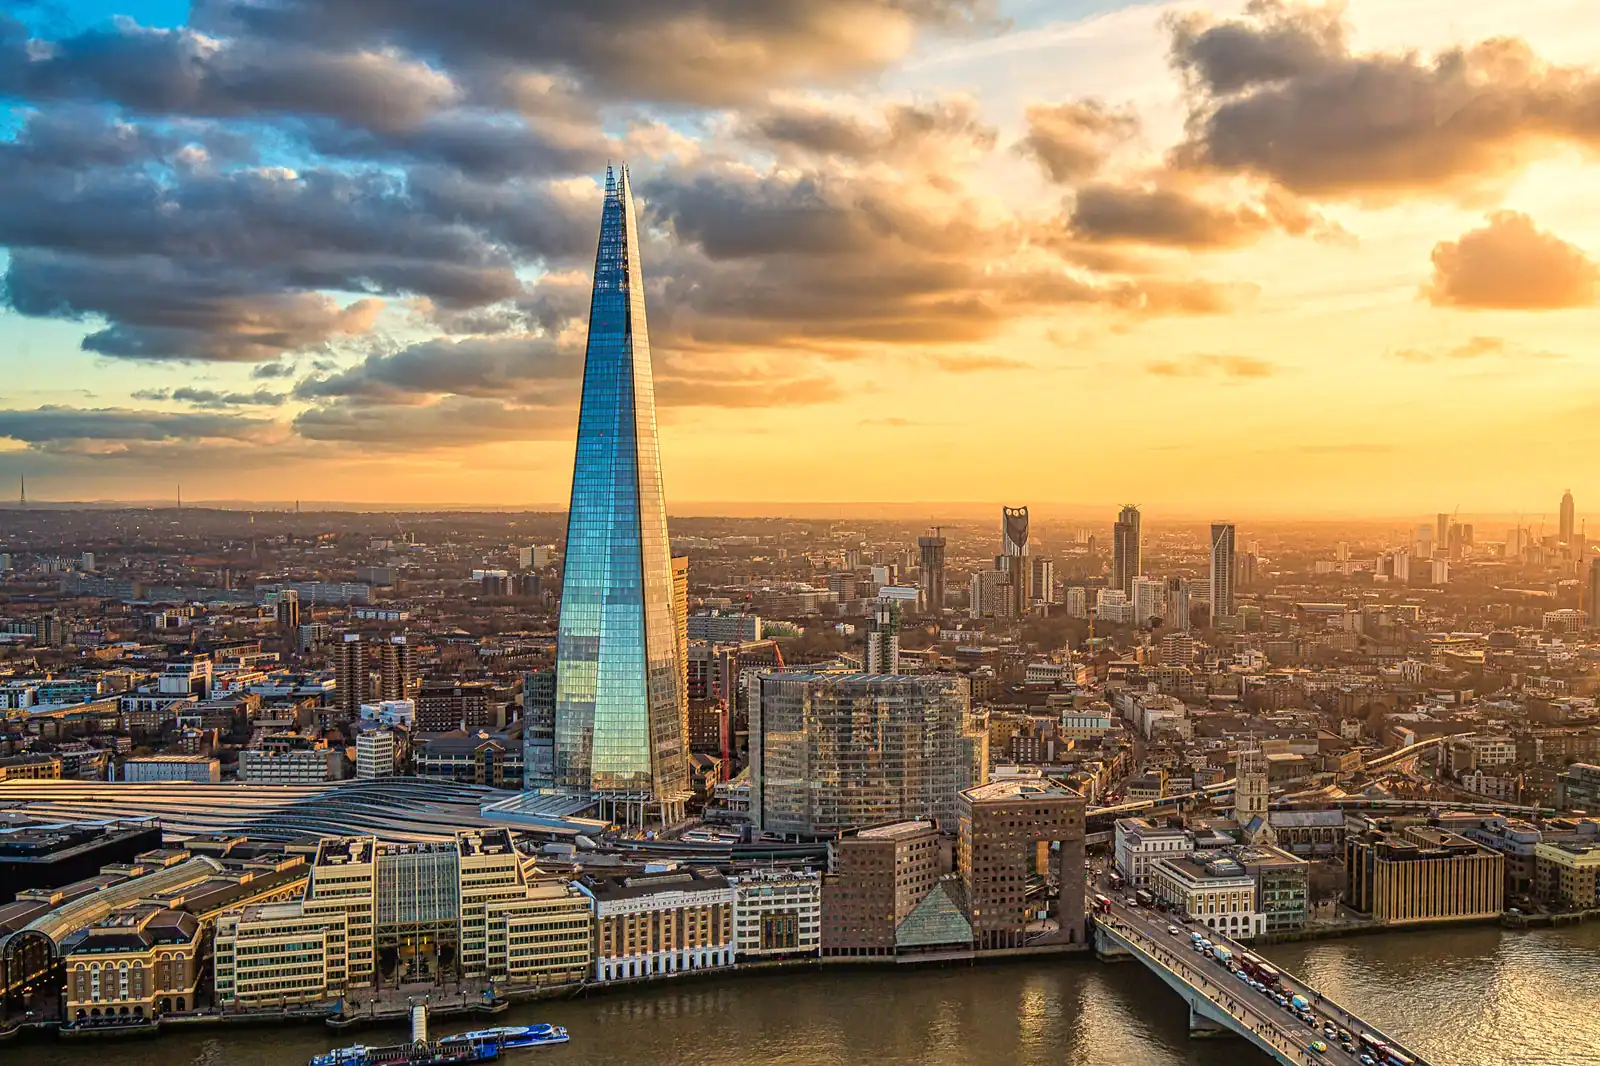 The Shard is the tallest building in London